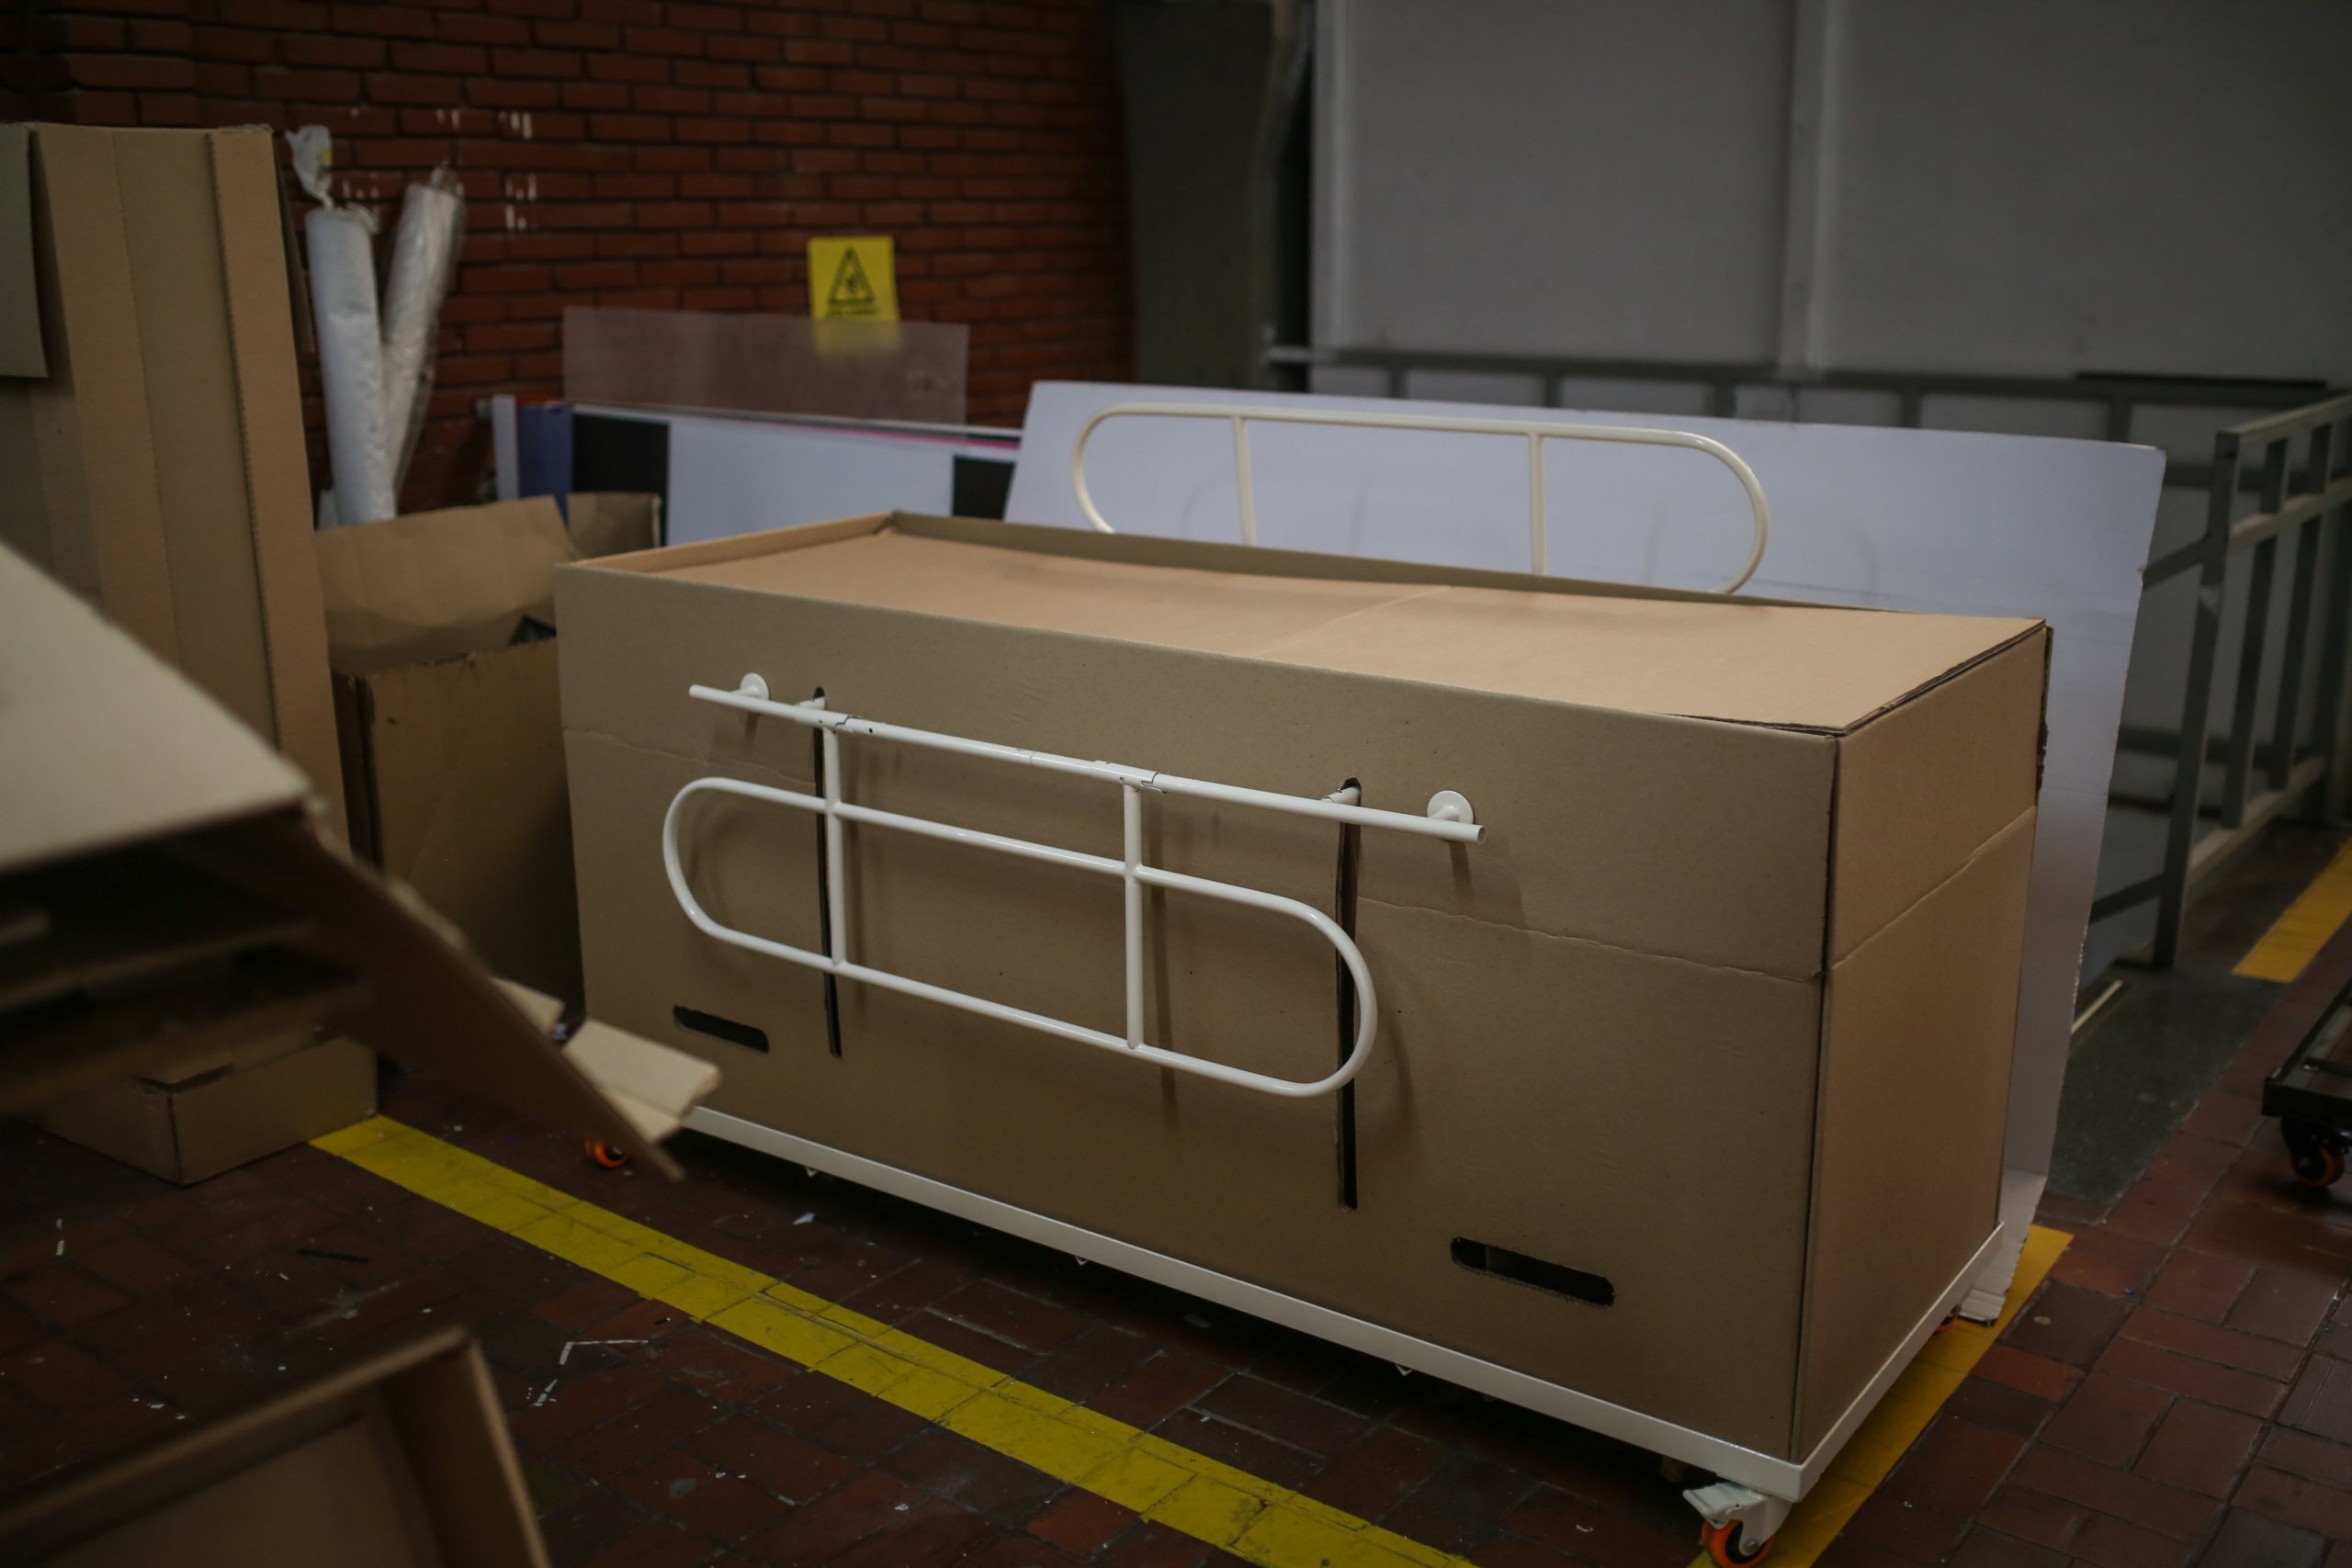 Colombia: A factory design cardboard hospital beds that become coffins on COVID-19 pandemic